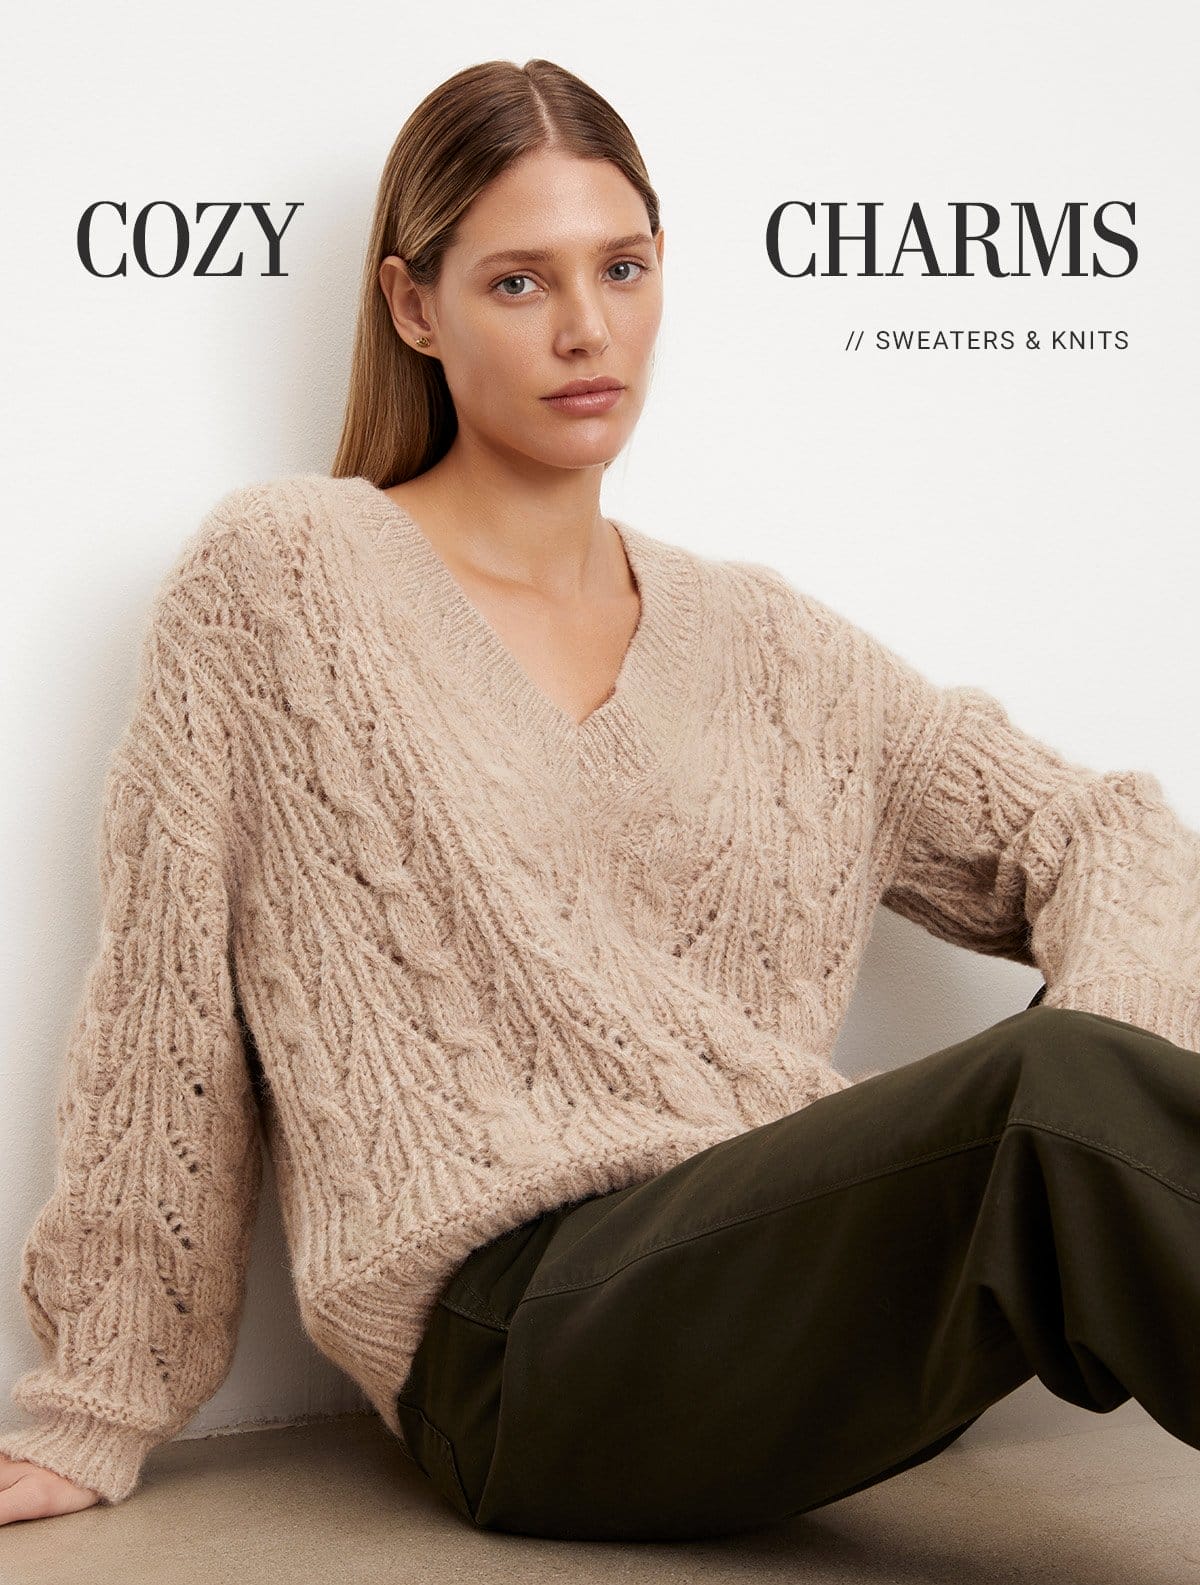 COZY CHARMS // SWEATERS & KNITS